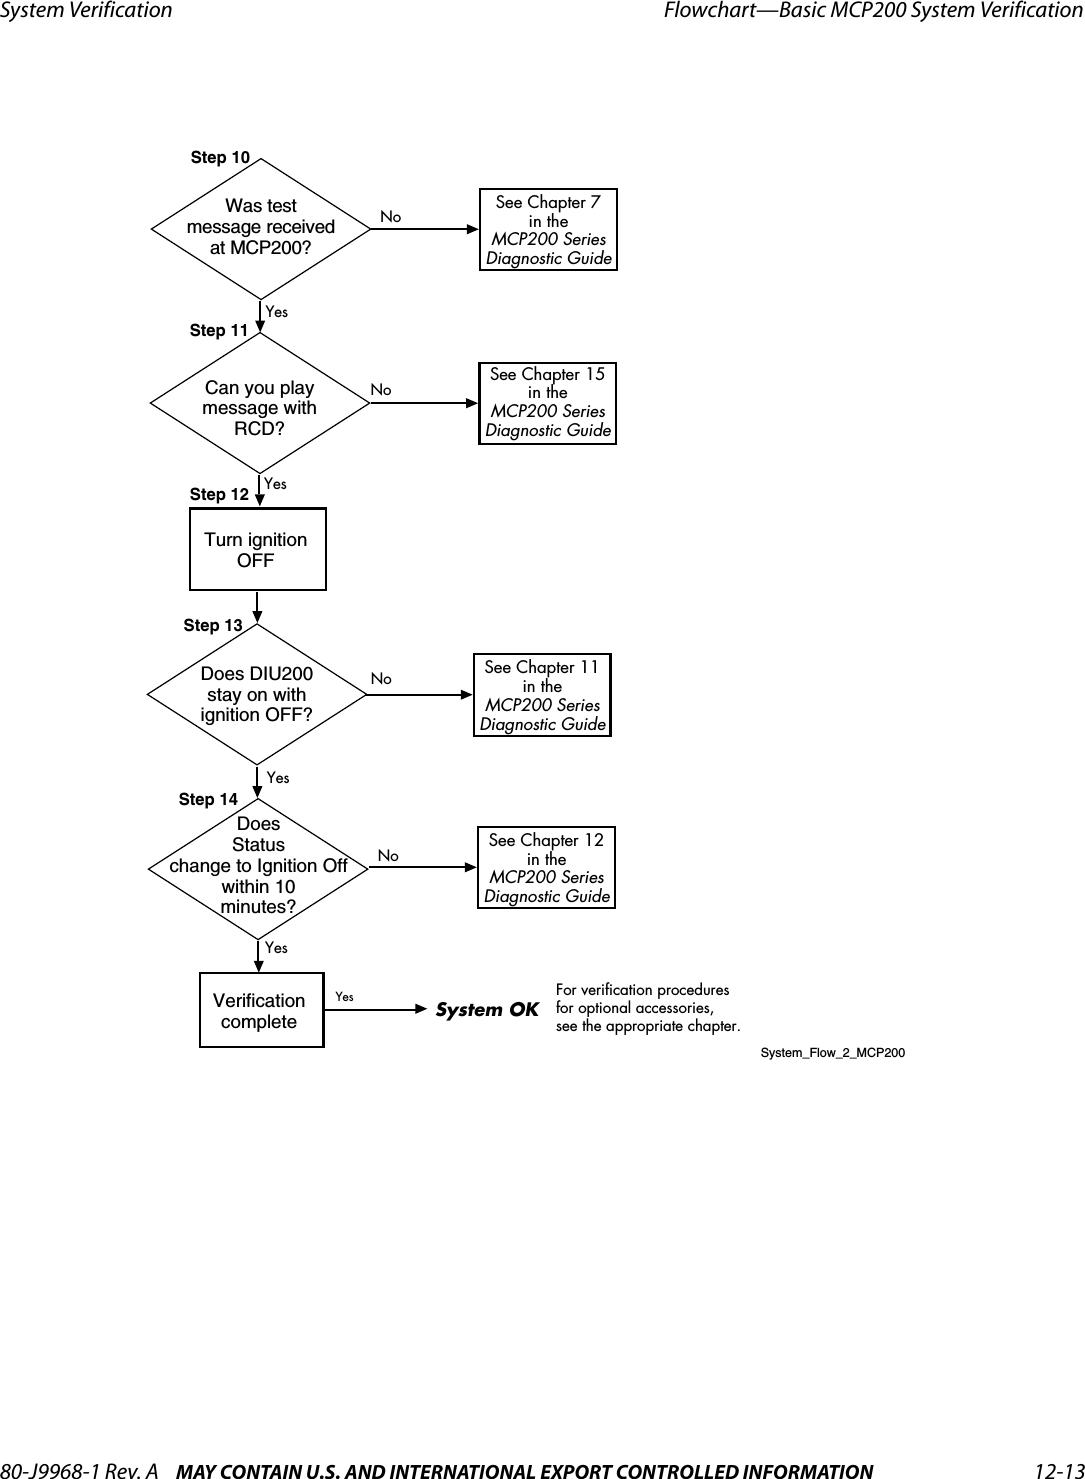 80-J9968-1 Rev. A MAY CONTAIN U.S. AND INTERNATIONAL EXPORT CONTROLLED INFORMATION 12-13System Verification Flowchart—Basic MCP200 System VerificationDO N OT COPYSystem_Flow_2_MCP200VerificationcompleteFor verification proceduresfor optional accessories,see the appropriate chapter.System OKYesStep 12Turn ignitionOFFStep 10See Chapter 7in theMCP200 SeriesDiagnostic GuideWas testmessage receivedat MCP200?NoYesYesStep 11See Chapter 15in theMCP200 SeriesDiagnostic GuideCan you playmessage withRCD?NoDoes DIU200stay on withignition OFF?See Chapter 11in theMCP200 SeriesDiagnostic GuideStep 13NoYesYesDoesStatuschange to Ignition Offwithin 10minutes?Step 14No See Chapter 12in theMCP200 SeriesDiagnostic Guide